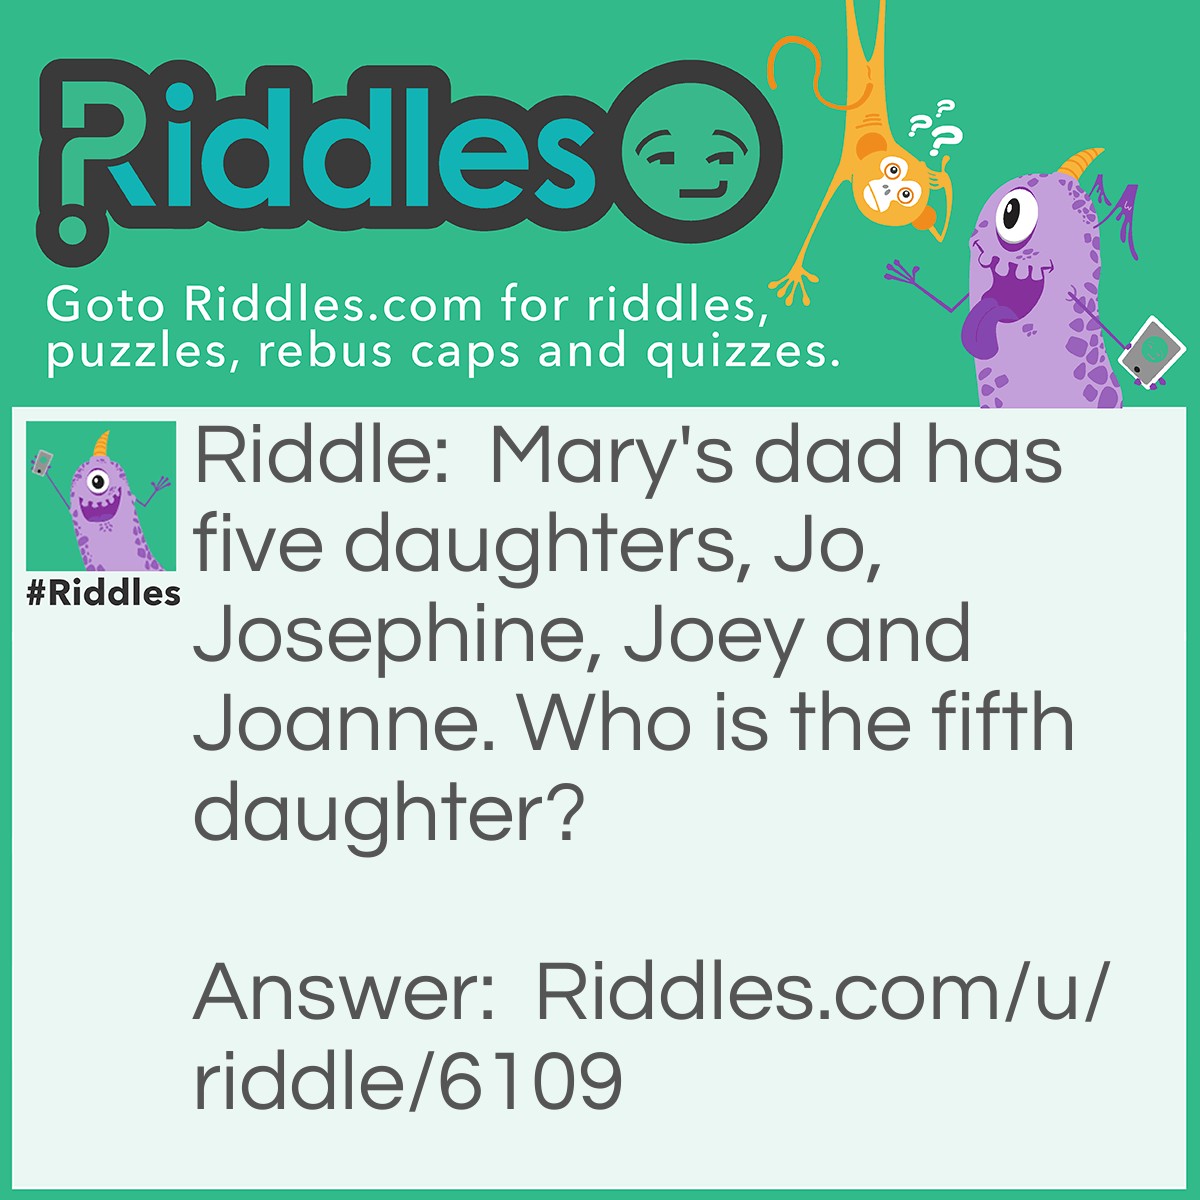 Riddle: Mary's dad has five daughters, Jo, Josephine, Joey and Joanne. Who is the fifth daughter? Answer: Mary.